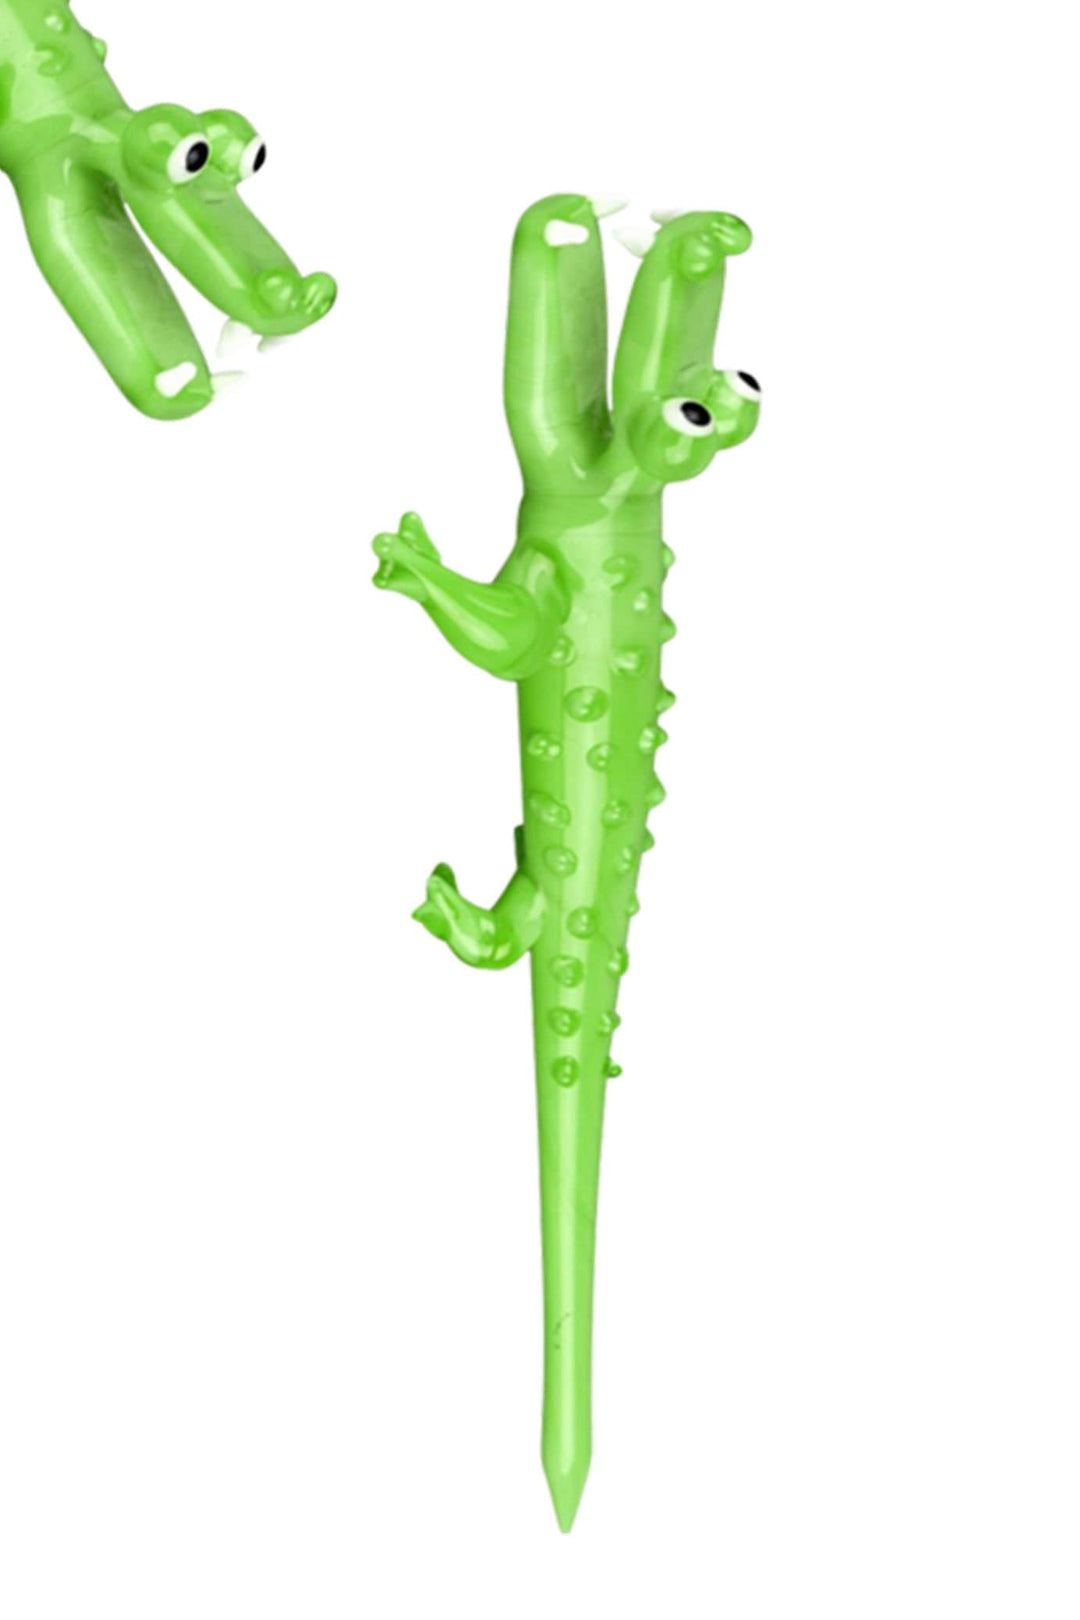 Gator Dab Tool - The SWL Store 